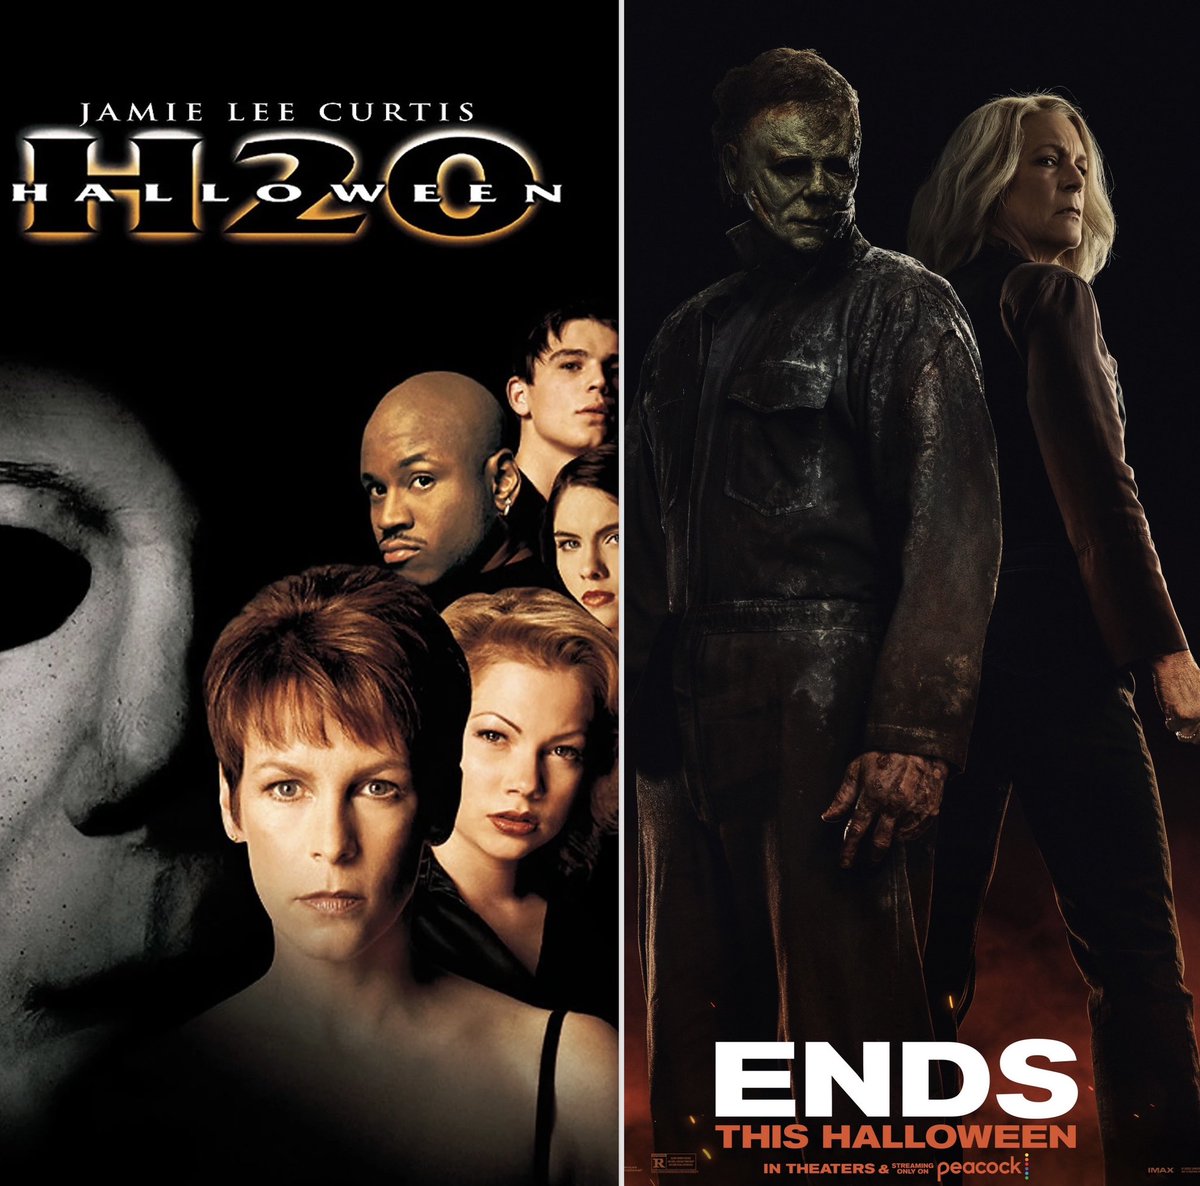 Which final act do you prefer?
#HalloweenH20 | #HalloweenEnds